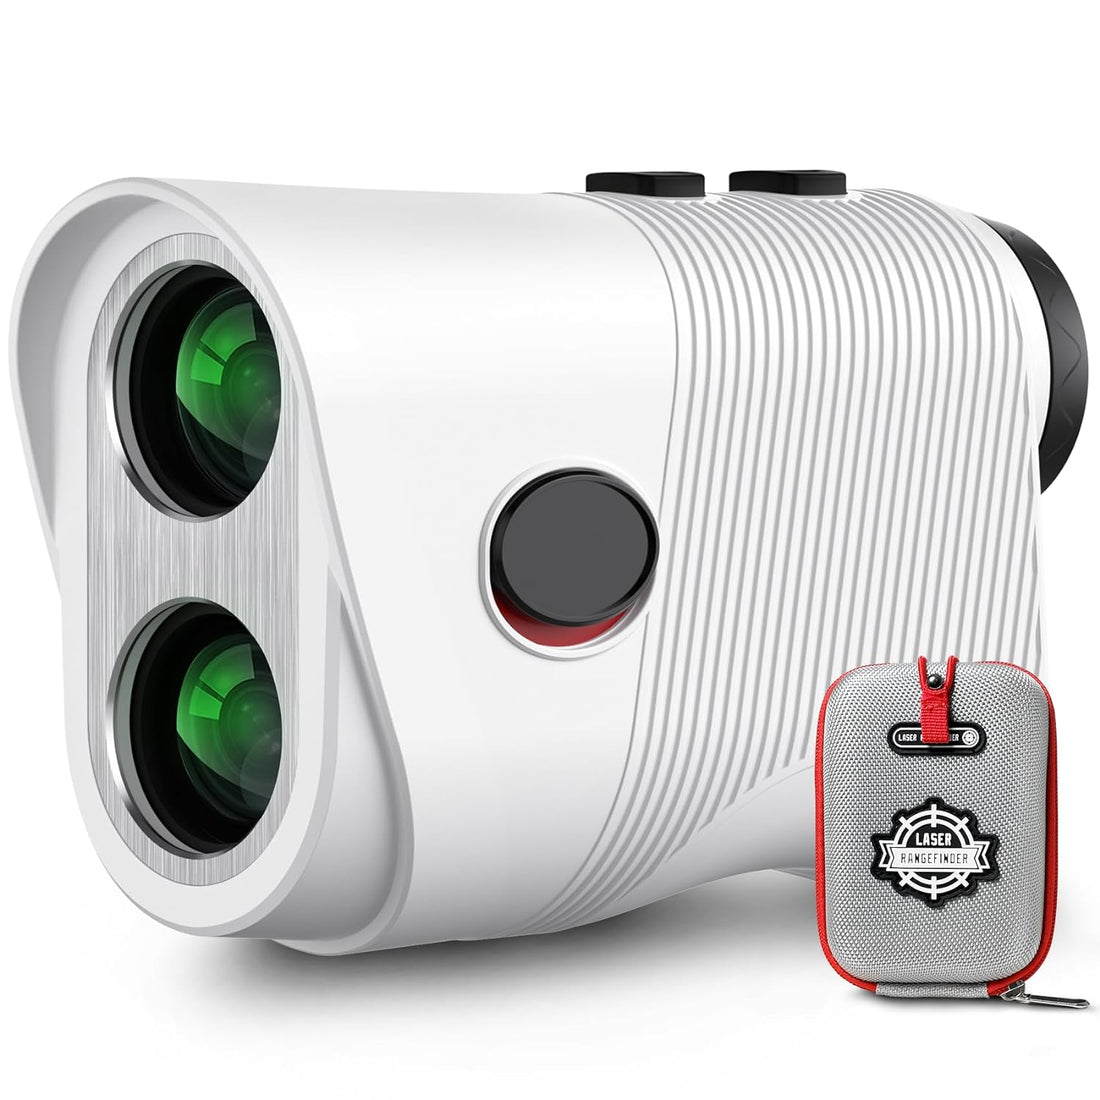 LILISPAI Golf Rangefinder with Slope, 800 Yards Laser Range Finder, 6x Magnification Range Finder Golf for Hunting, Type-C Rechargeable Rangefinder with Magnetic Holder and Flag Pole Locking Vibration